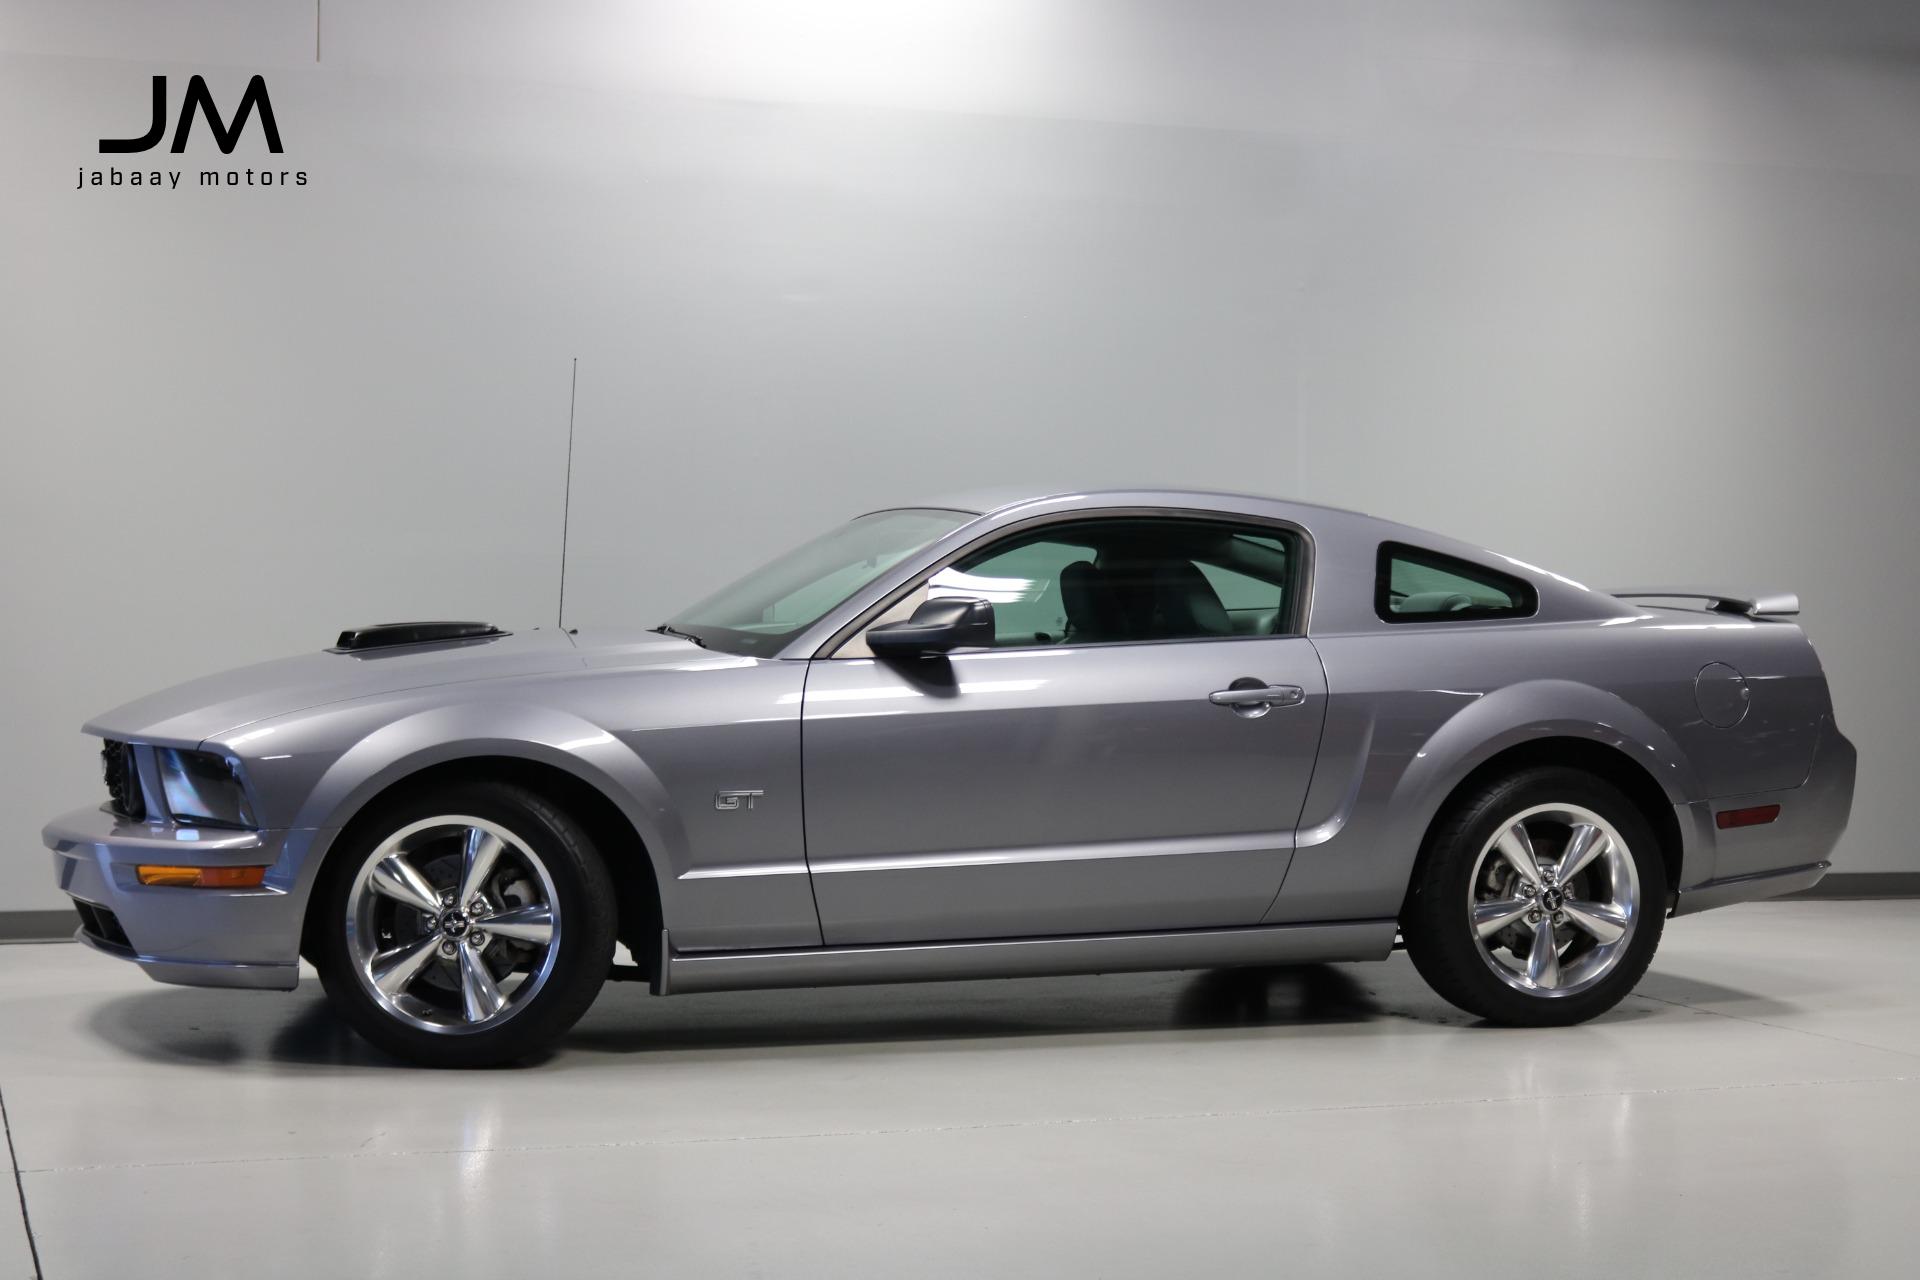 used-2006-ford-mustang-gt-deluxe-for-sale-sold-jabaay-motors-inc